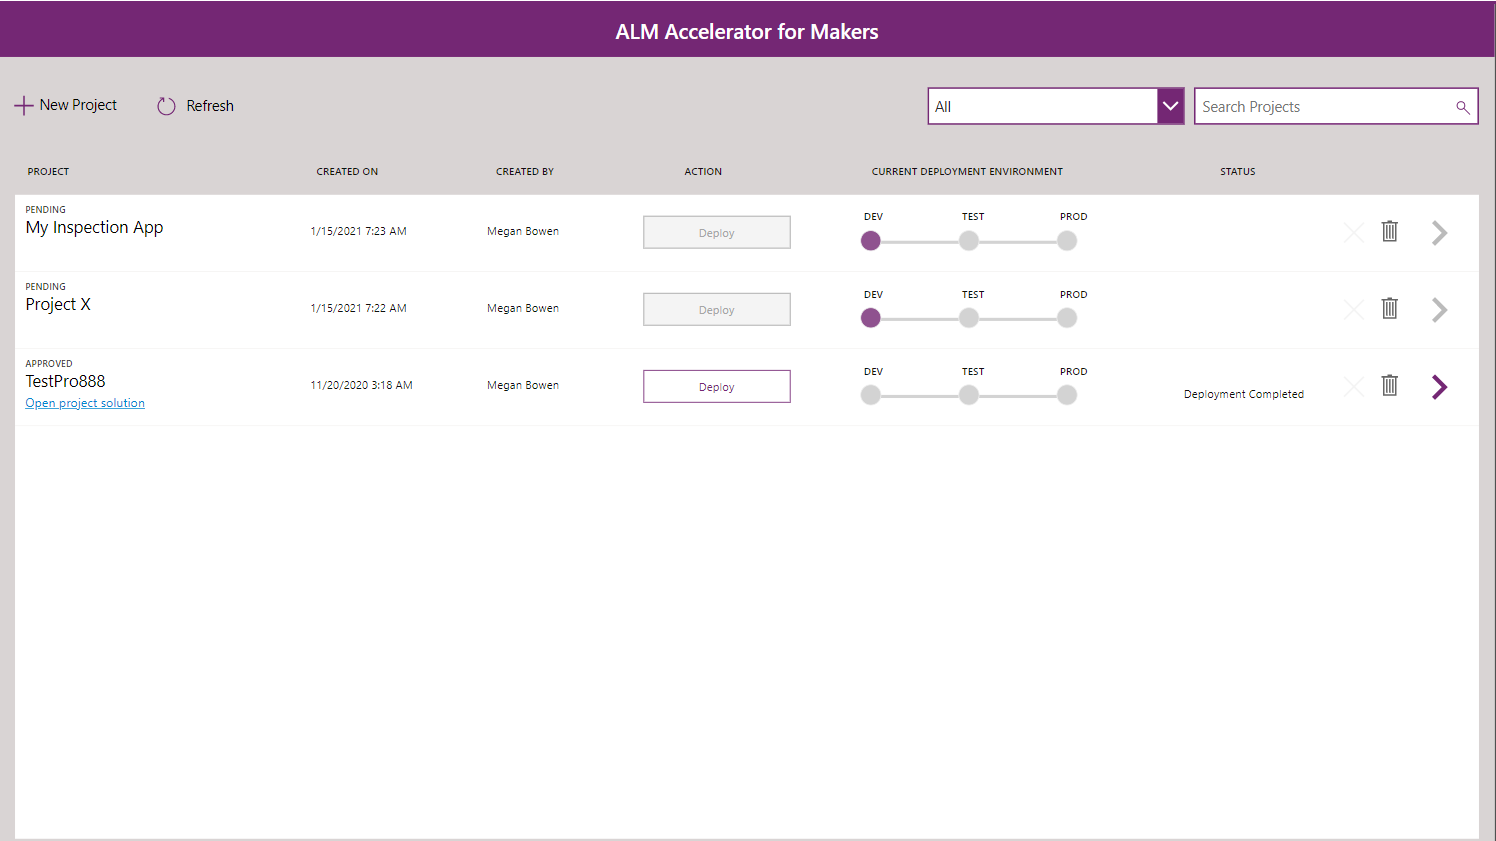 ALM Accelerator for Makers app.